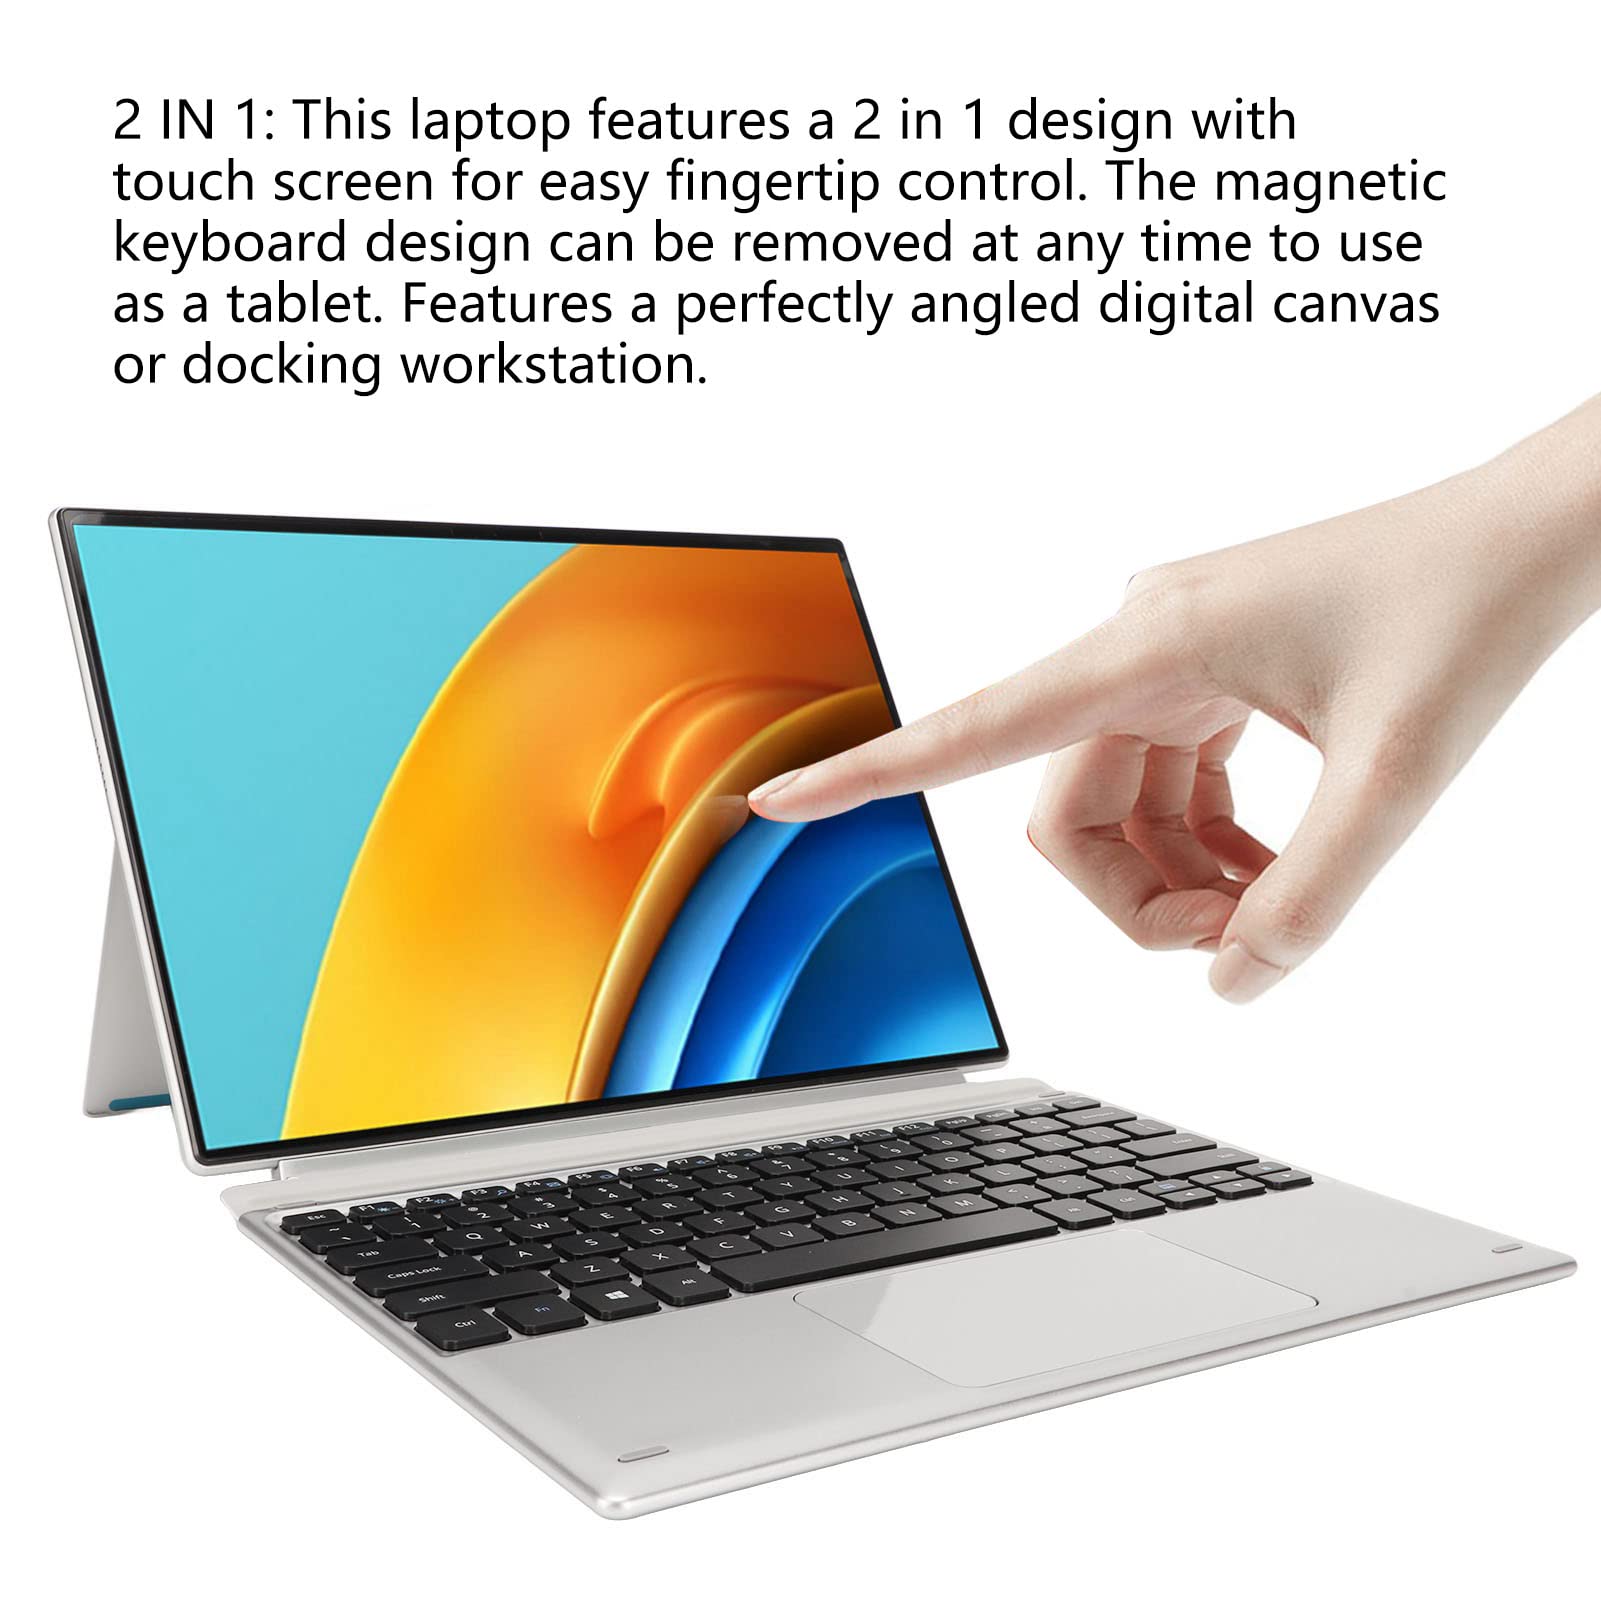 Laptop 12GB RAM 256GB SSD, 12.3 in IPS Panel 3K 2880X1920 Portable Laptop with Magnetic Keyboard and Touch Screen, Large Screen with 3:2 Aspect Ratio, for Win 11(USA)